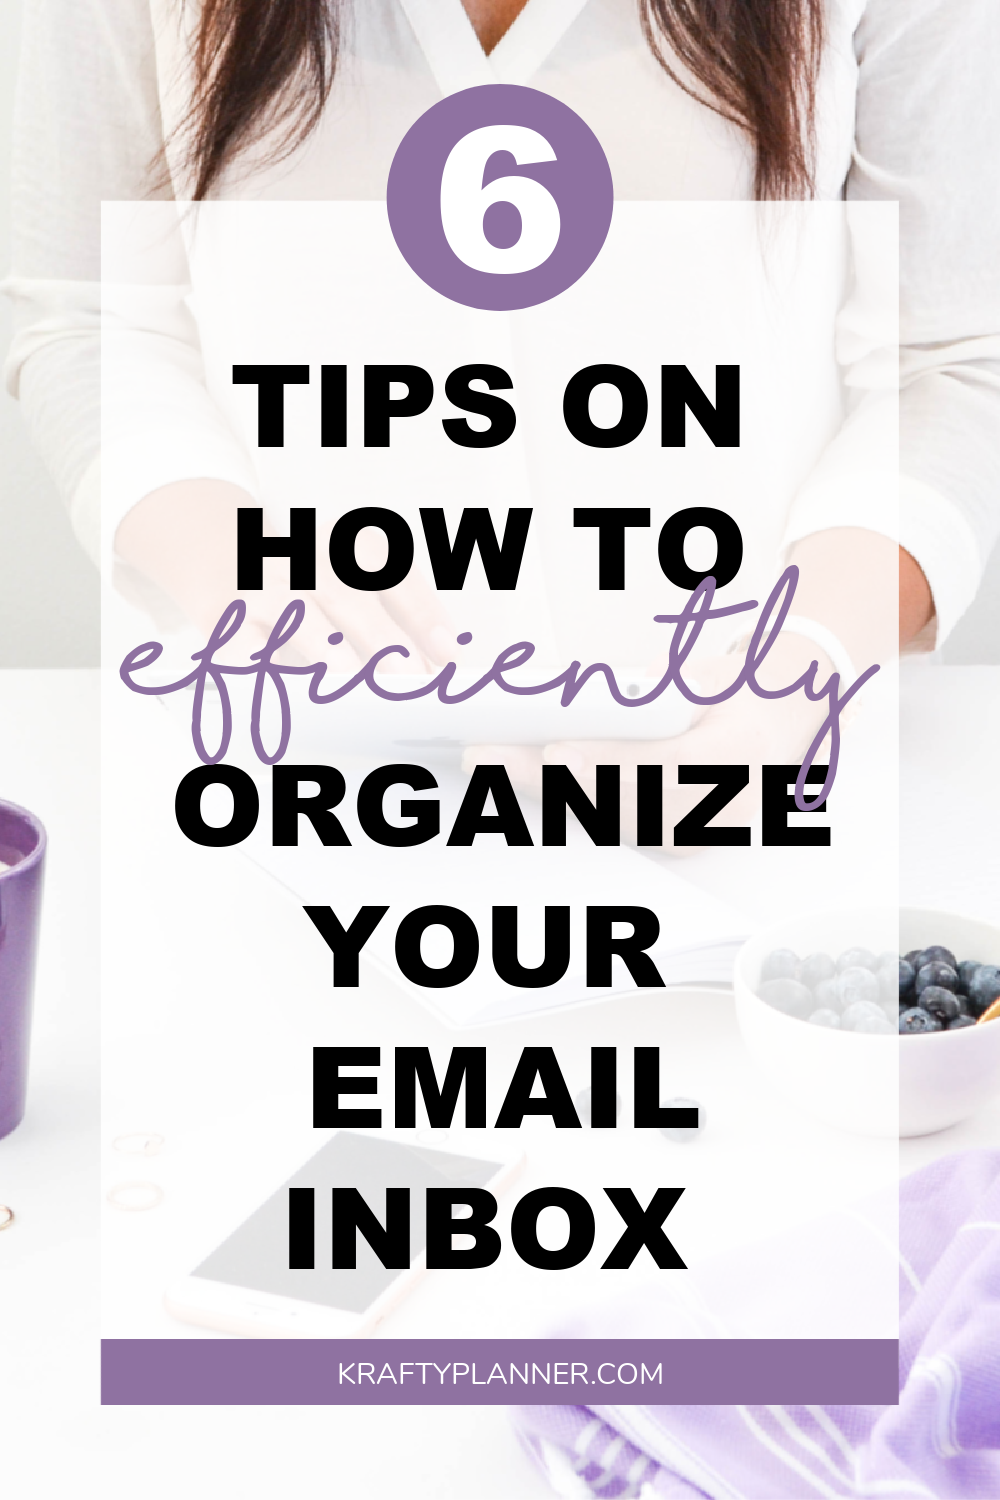 6 Tips on How To Efficiently Organize Your Email Inbox